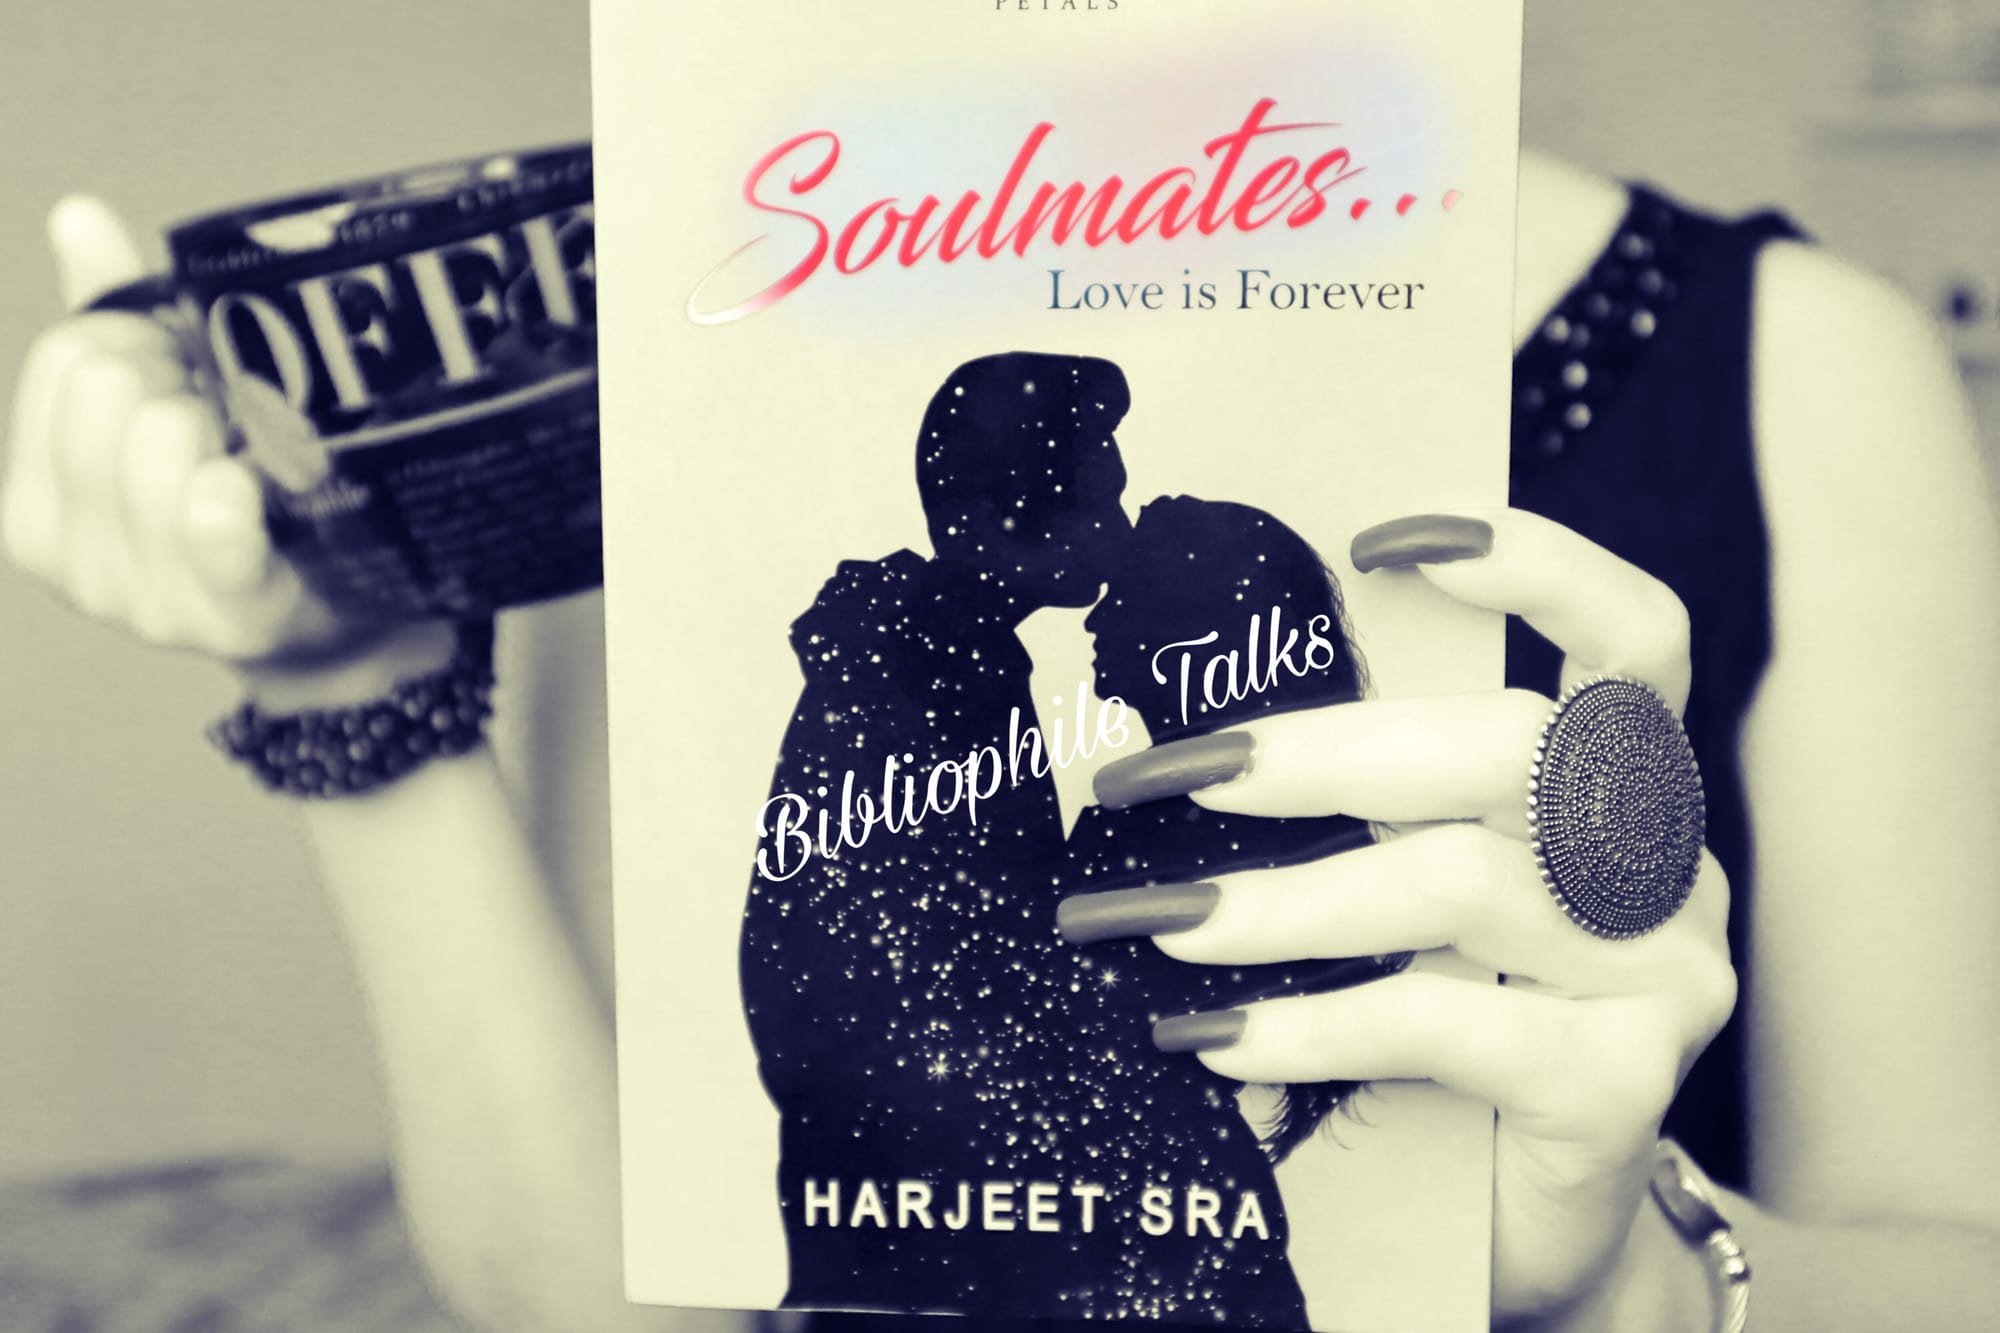 SOULMATES, LOVE IS FOREVER